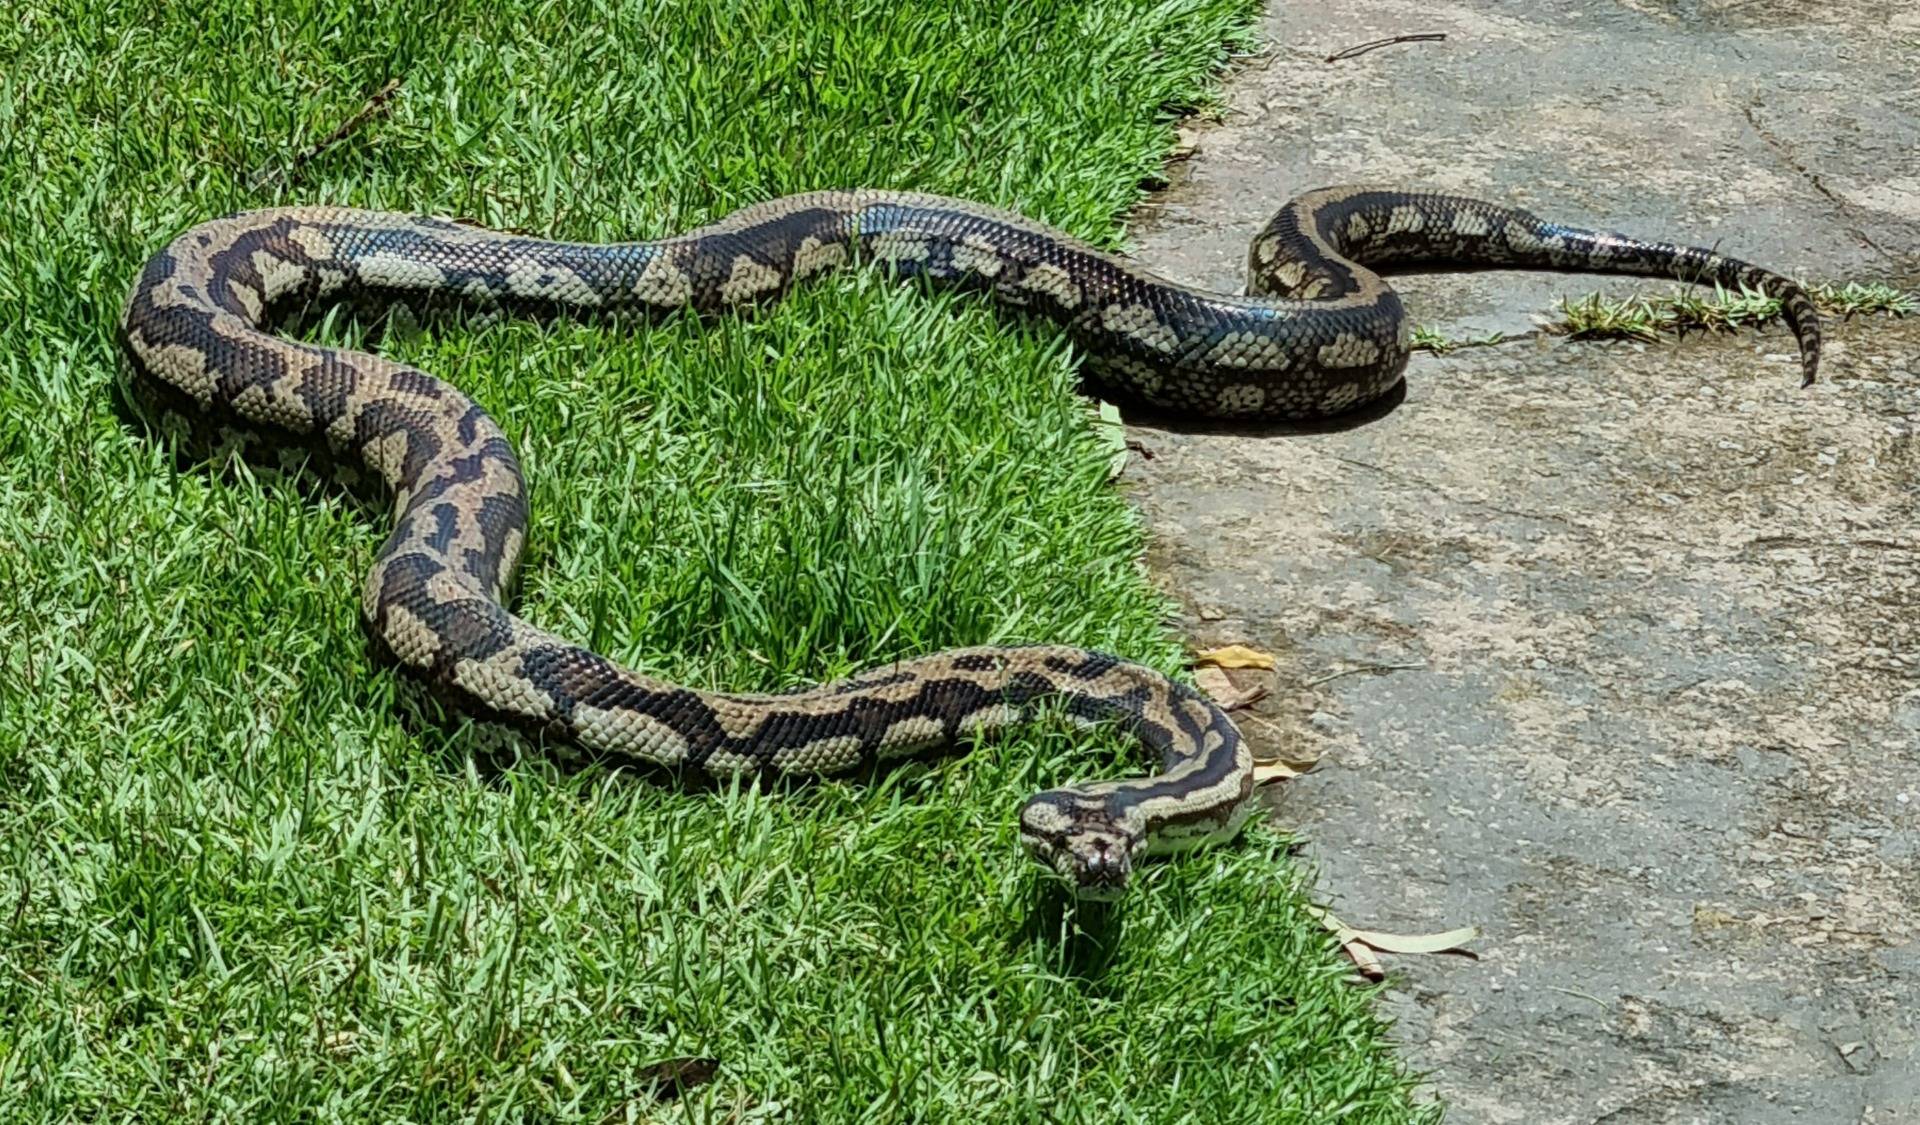 A Jungle Python (related to the more commonly known Carpet Python), on display during the reptile show.